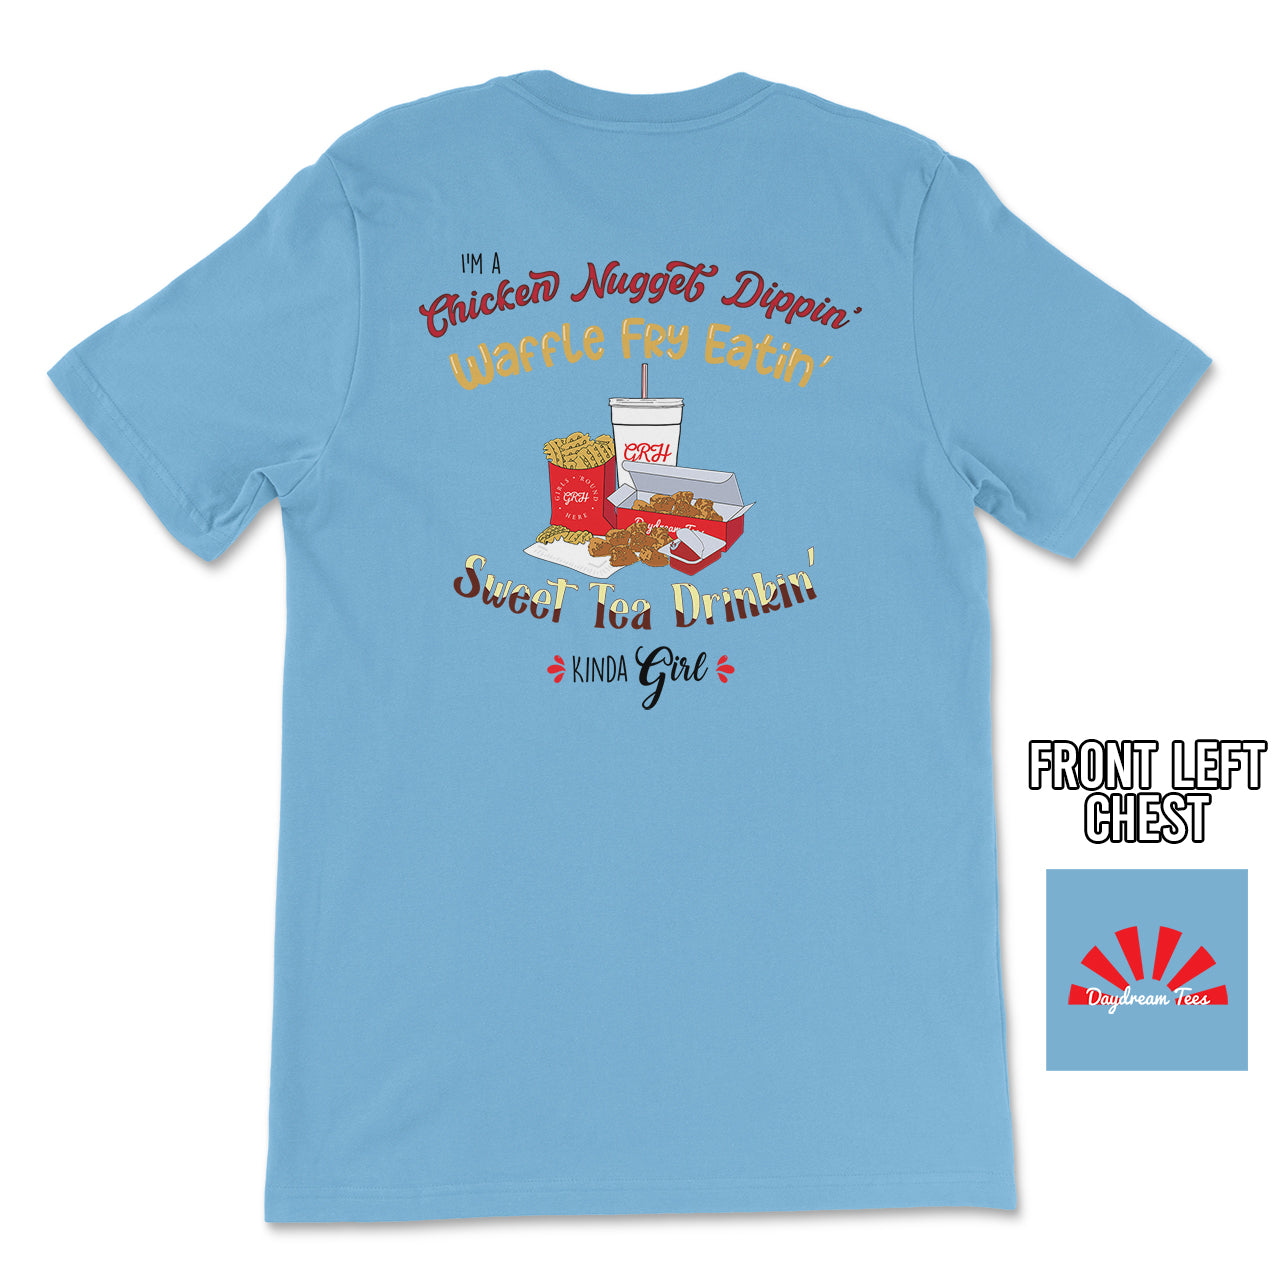 Daydream Tees Chicken Nugget Dippin' Sky